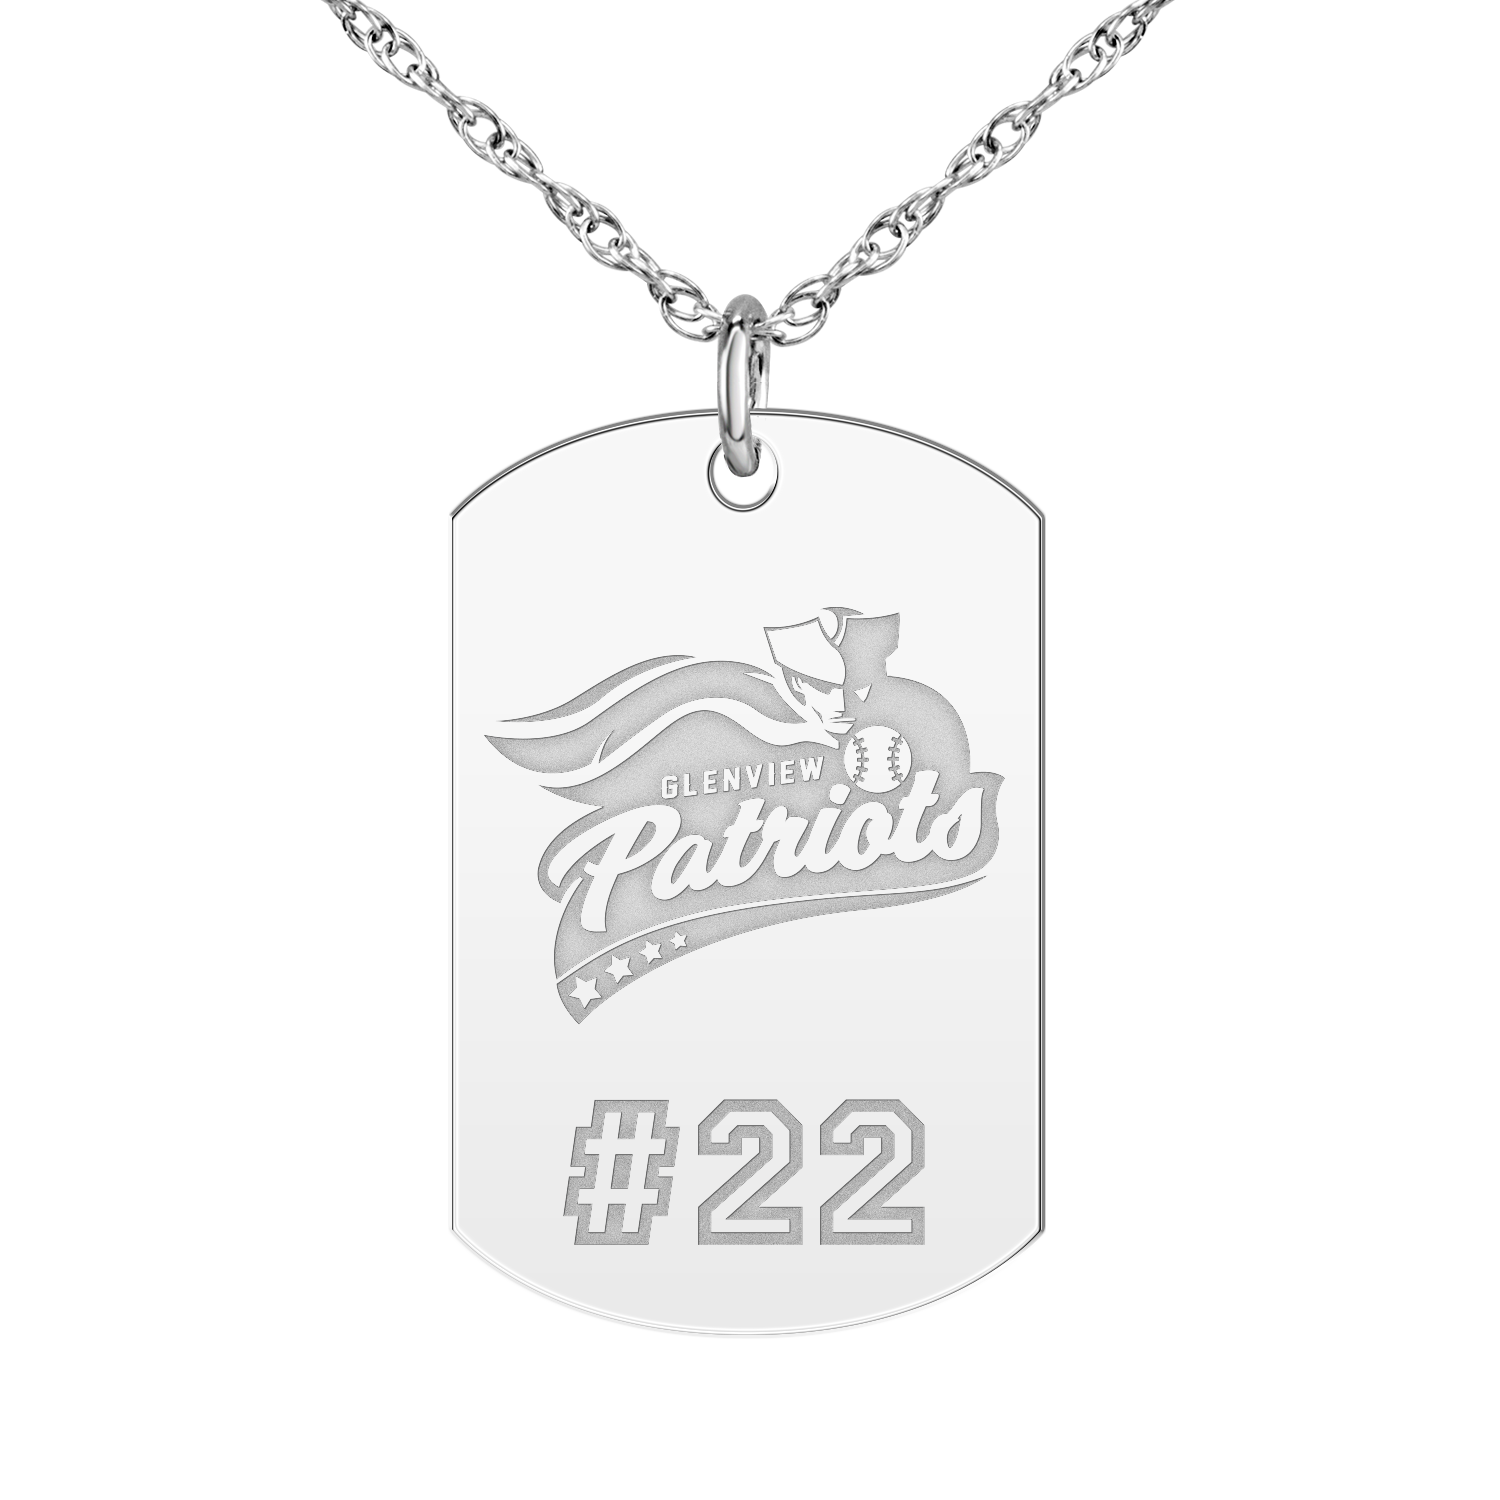 Glenview Patriots Player’s Number Tag Large